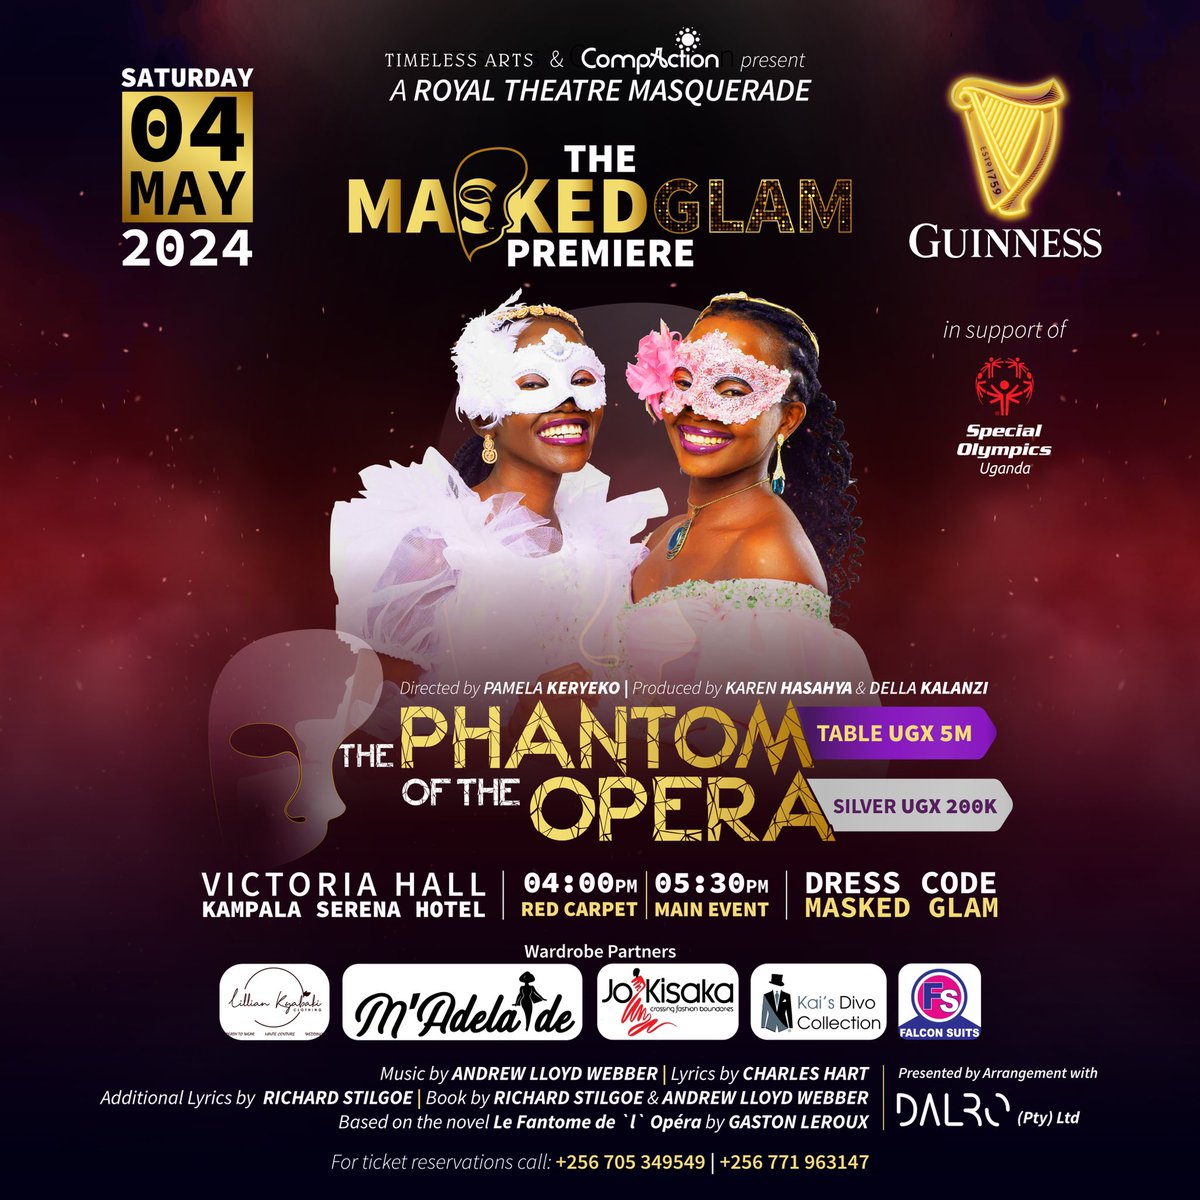 Tonight, @TimelessUg presents a theatrical #PHANTOM_OF_THE_OPERA at @kampalaserena 
Delicately directed by @KeryekoL and featuring a superbly selected cast. It's a red carpet affair with masked glamour 
200k silver 5m a table
Restoring the glory of theatre